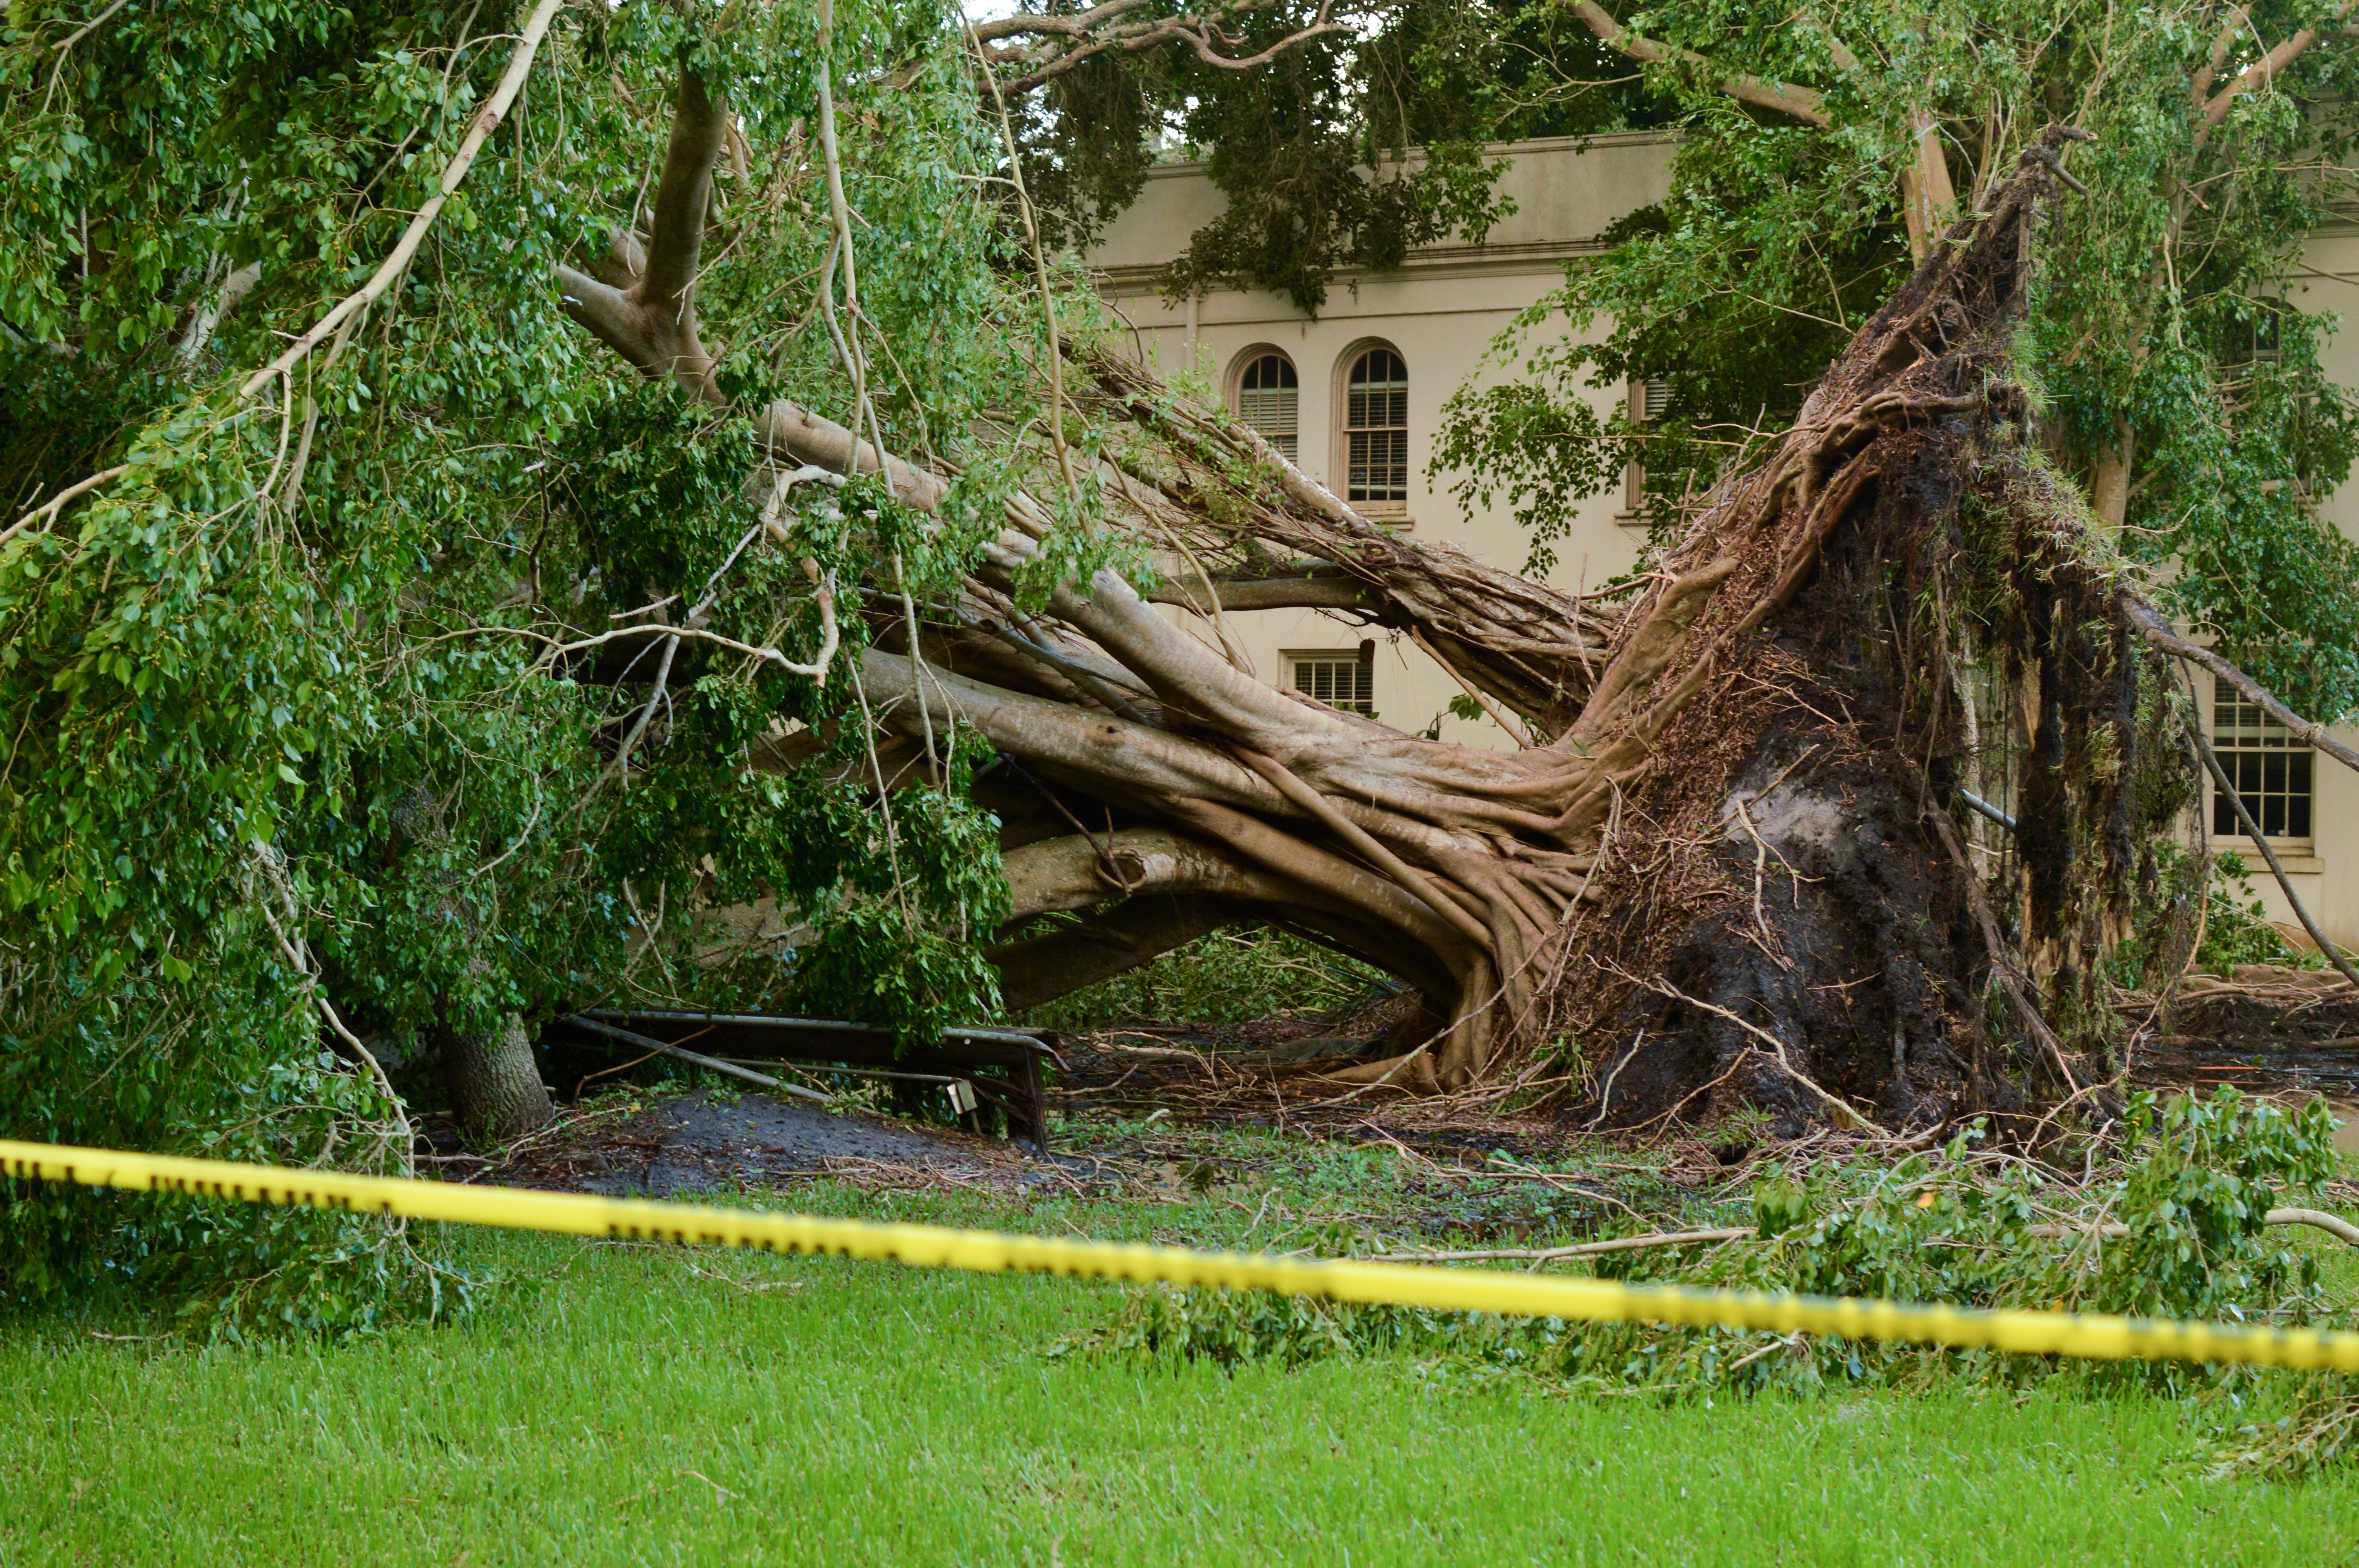 Missing in action: understanding tree removal on campus